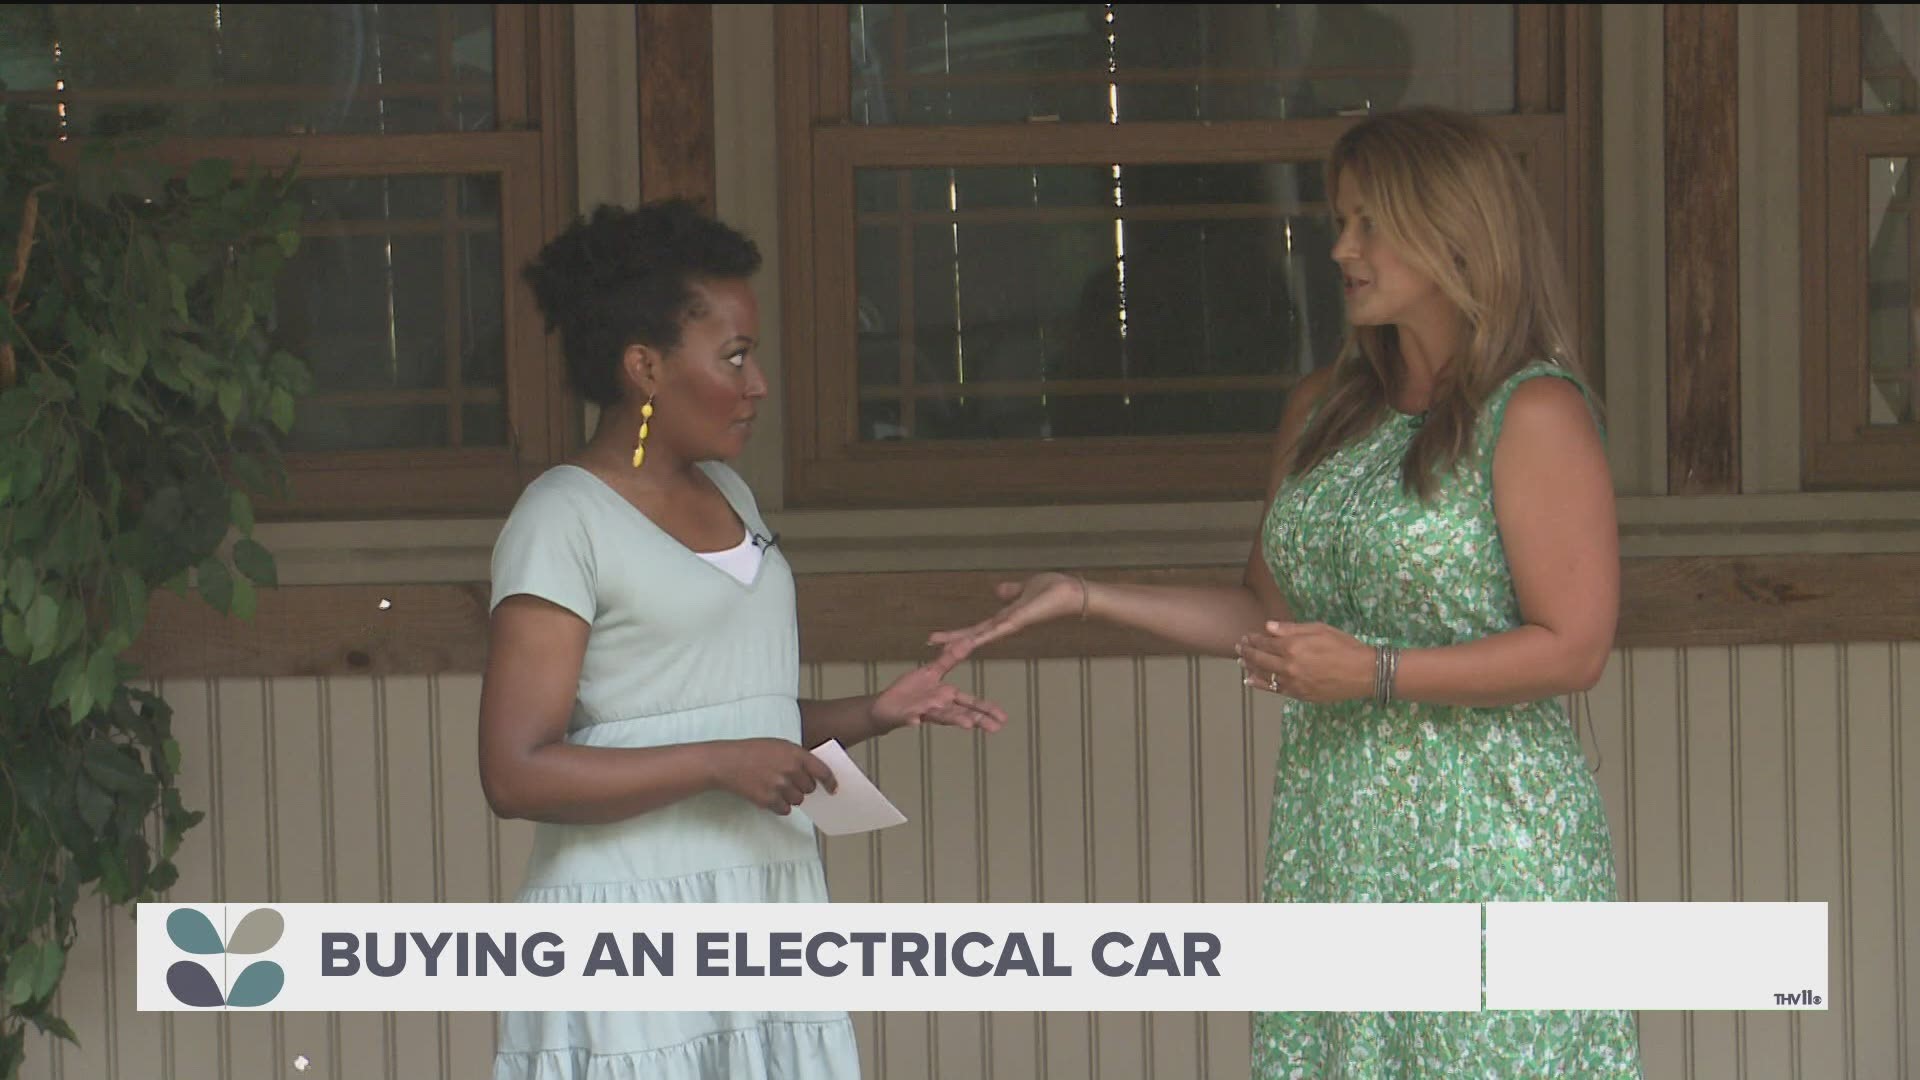 It’s estimated that by 2030, 30% of Americans will own an electric vehicle. Automotive Consultant Victoria Keith shares the pros of driving an electric car.